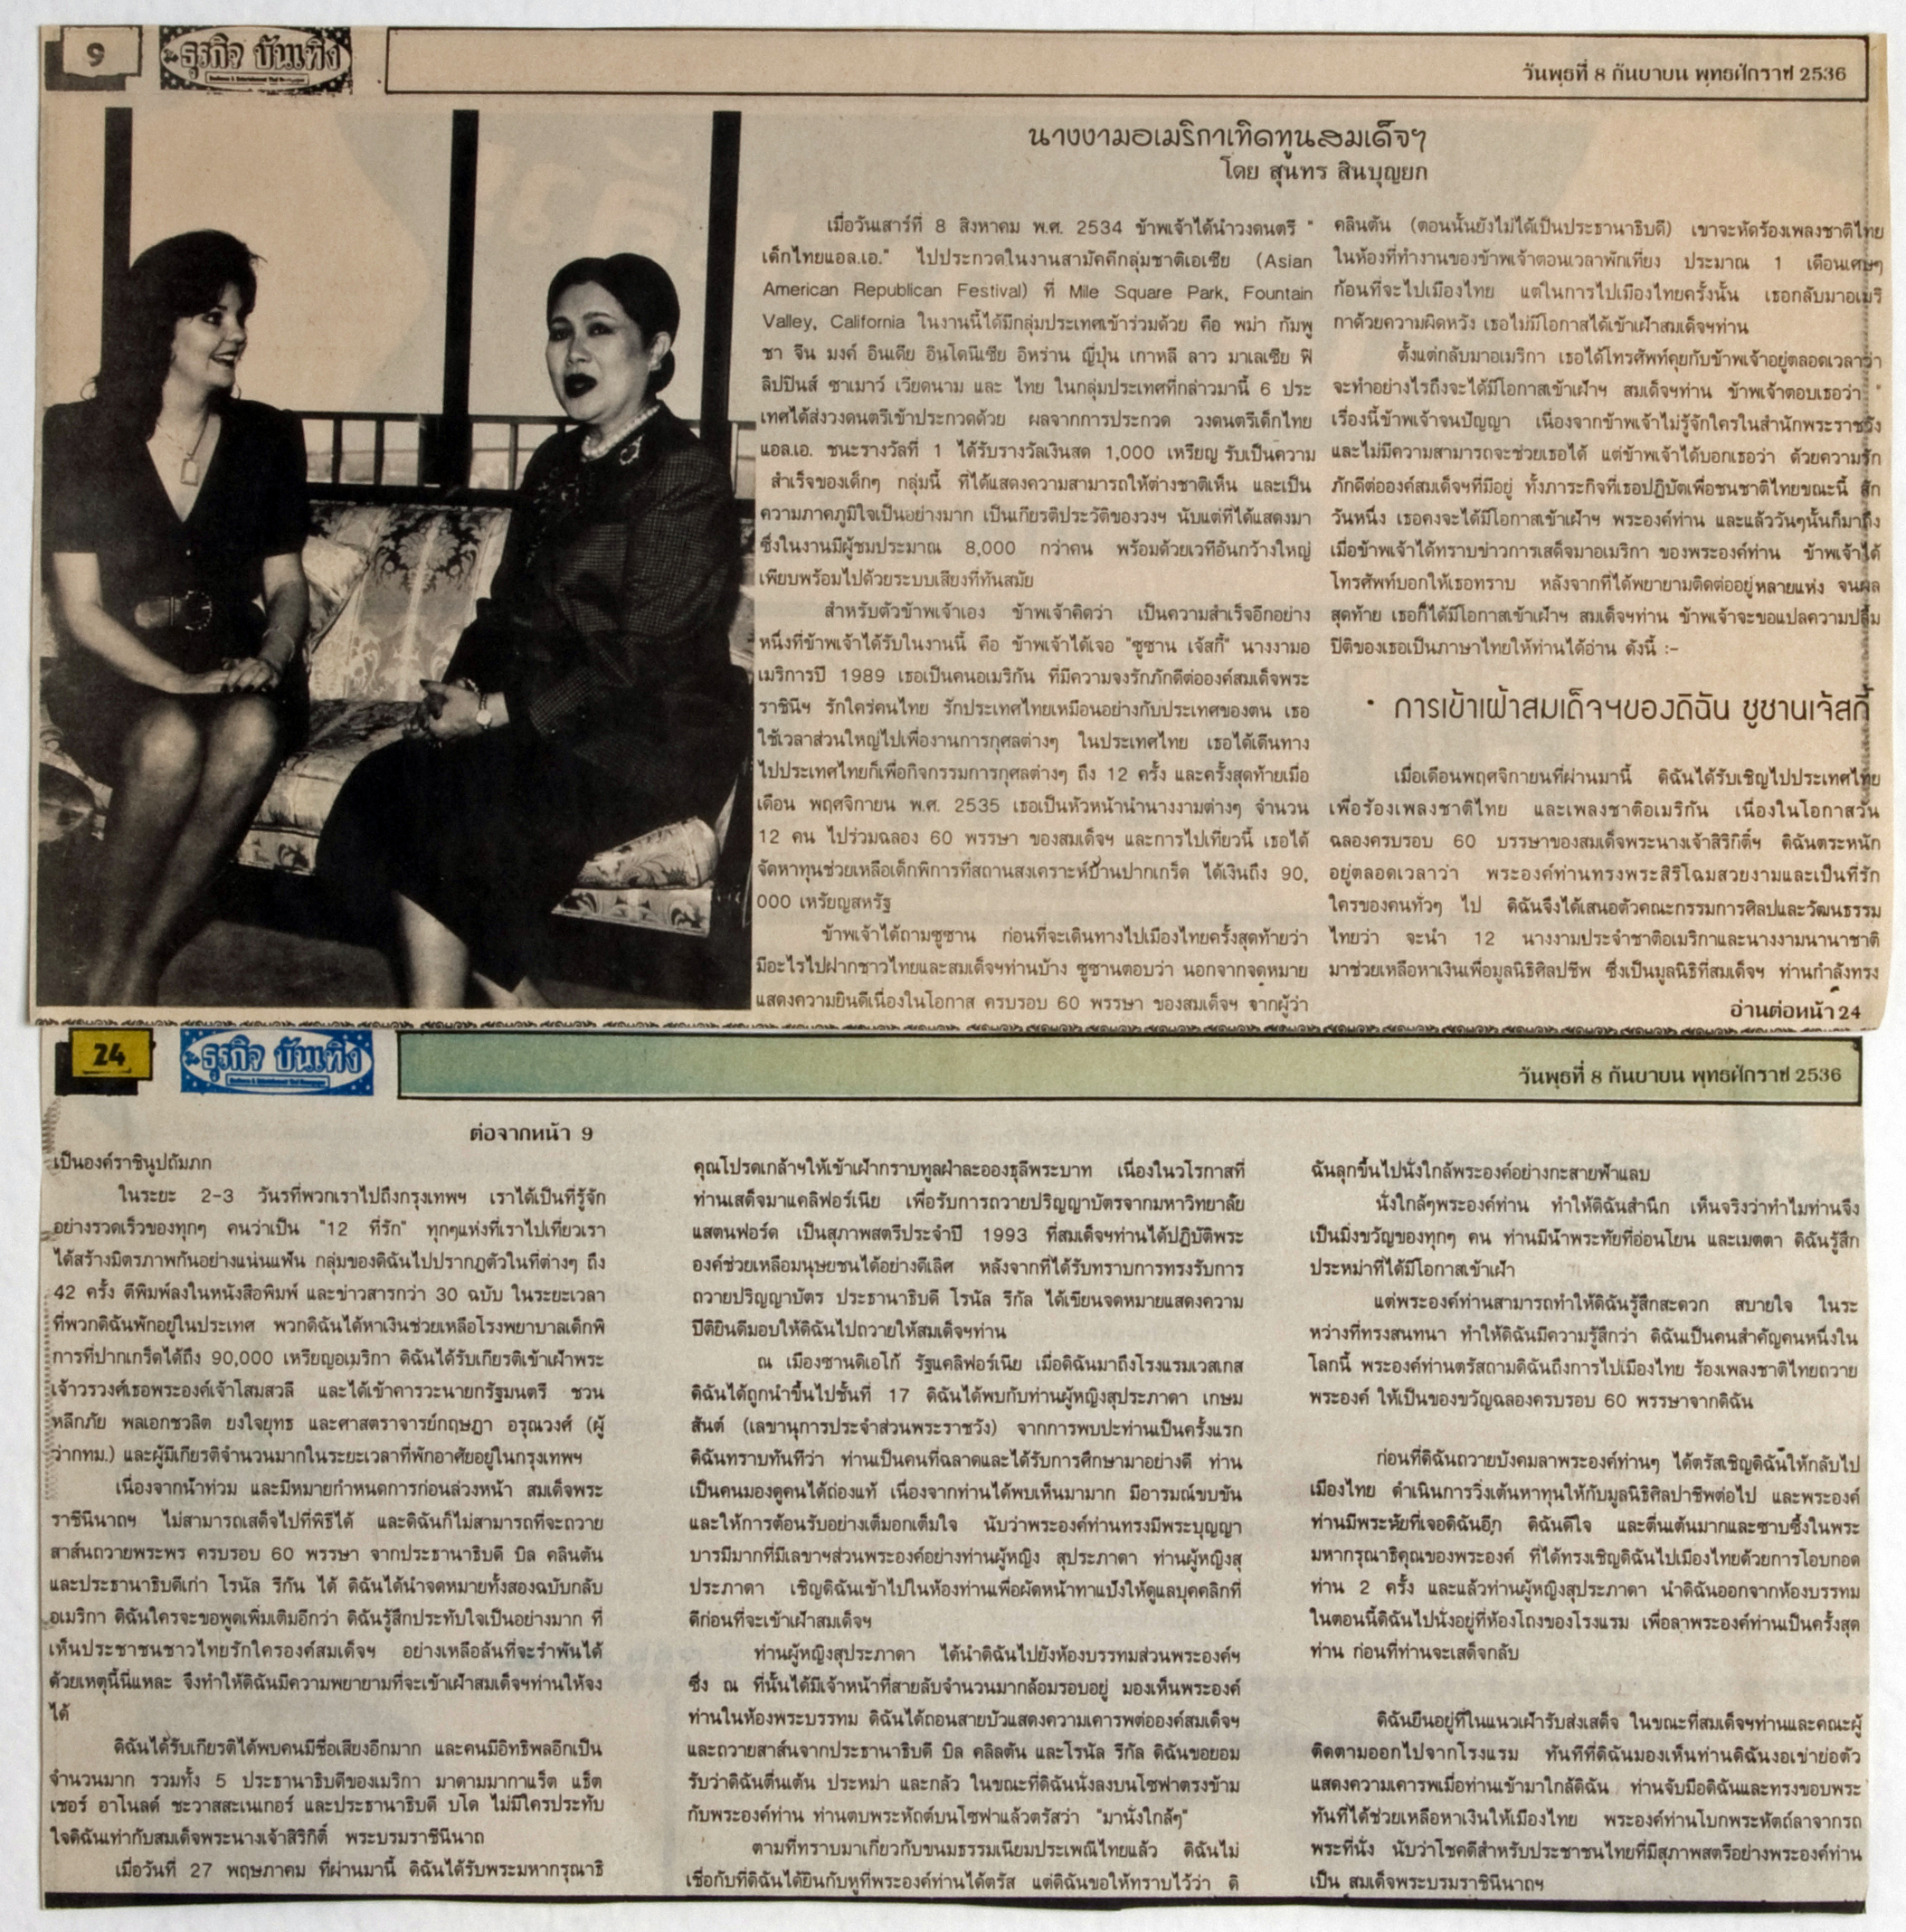 Full Page Newspaper Article which talks about the Delegation of Beauty Queens traveling to Thailand and Susan recieving a private audience where she meets Her Majesty Queen Sirikit of Thailand.